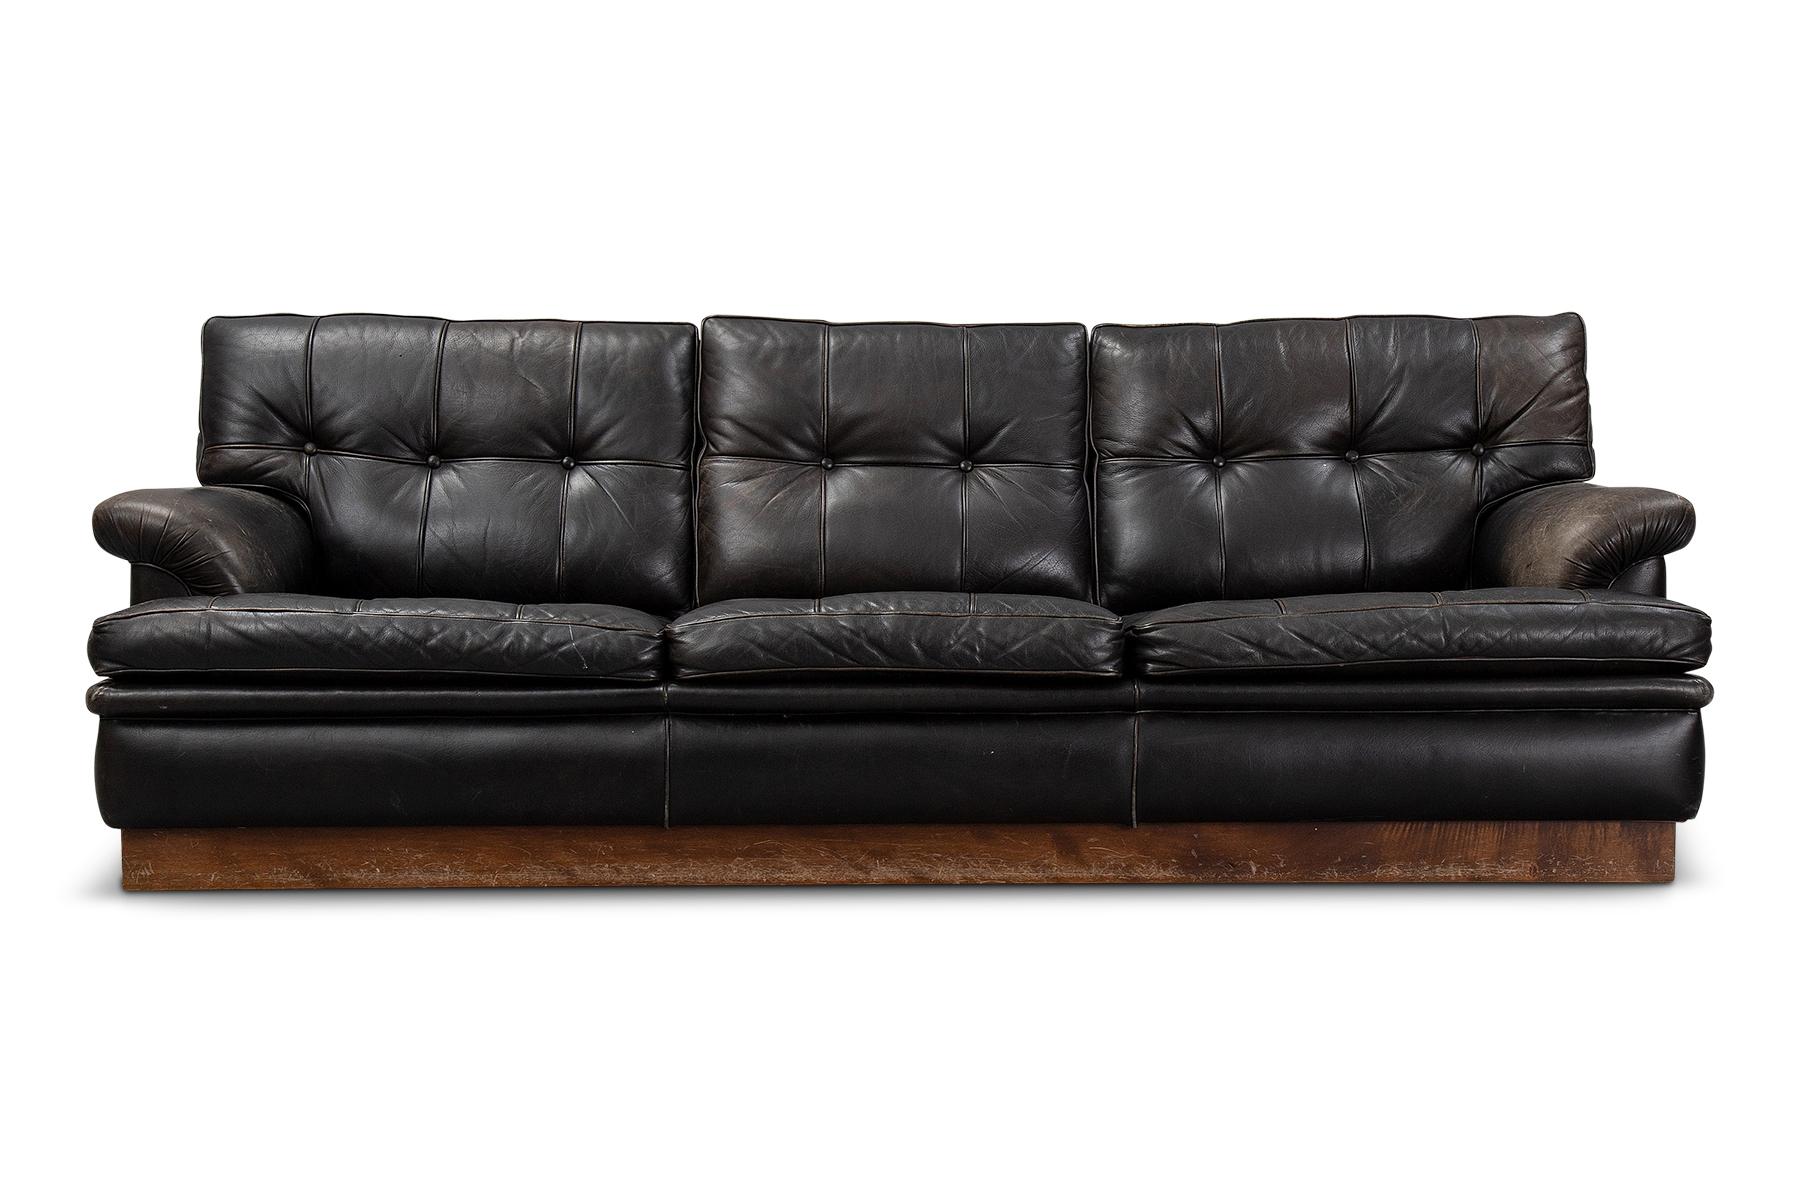 Swedish Arne Norell ‘mexico’ Sofa in Black Leather